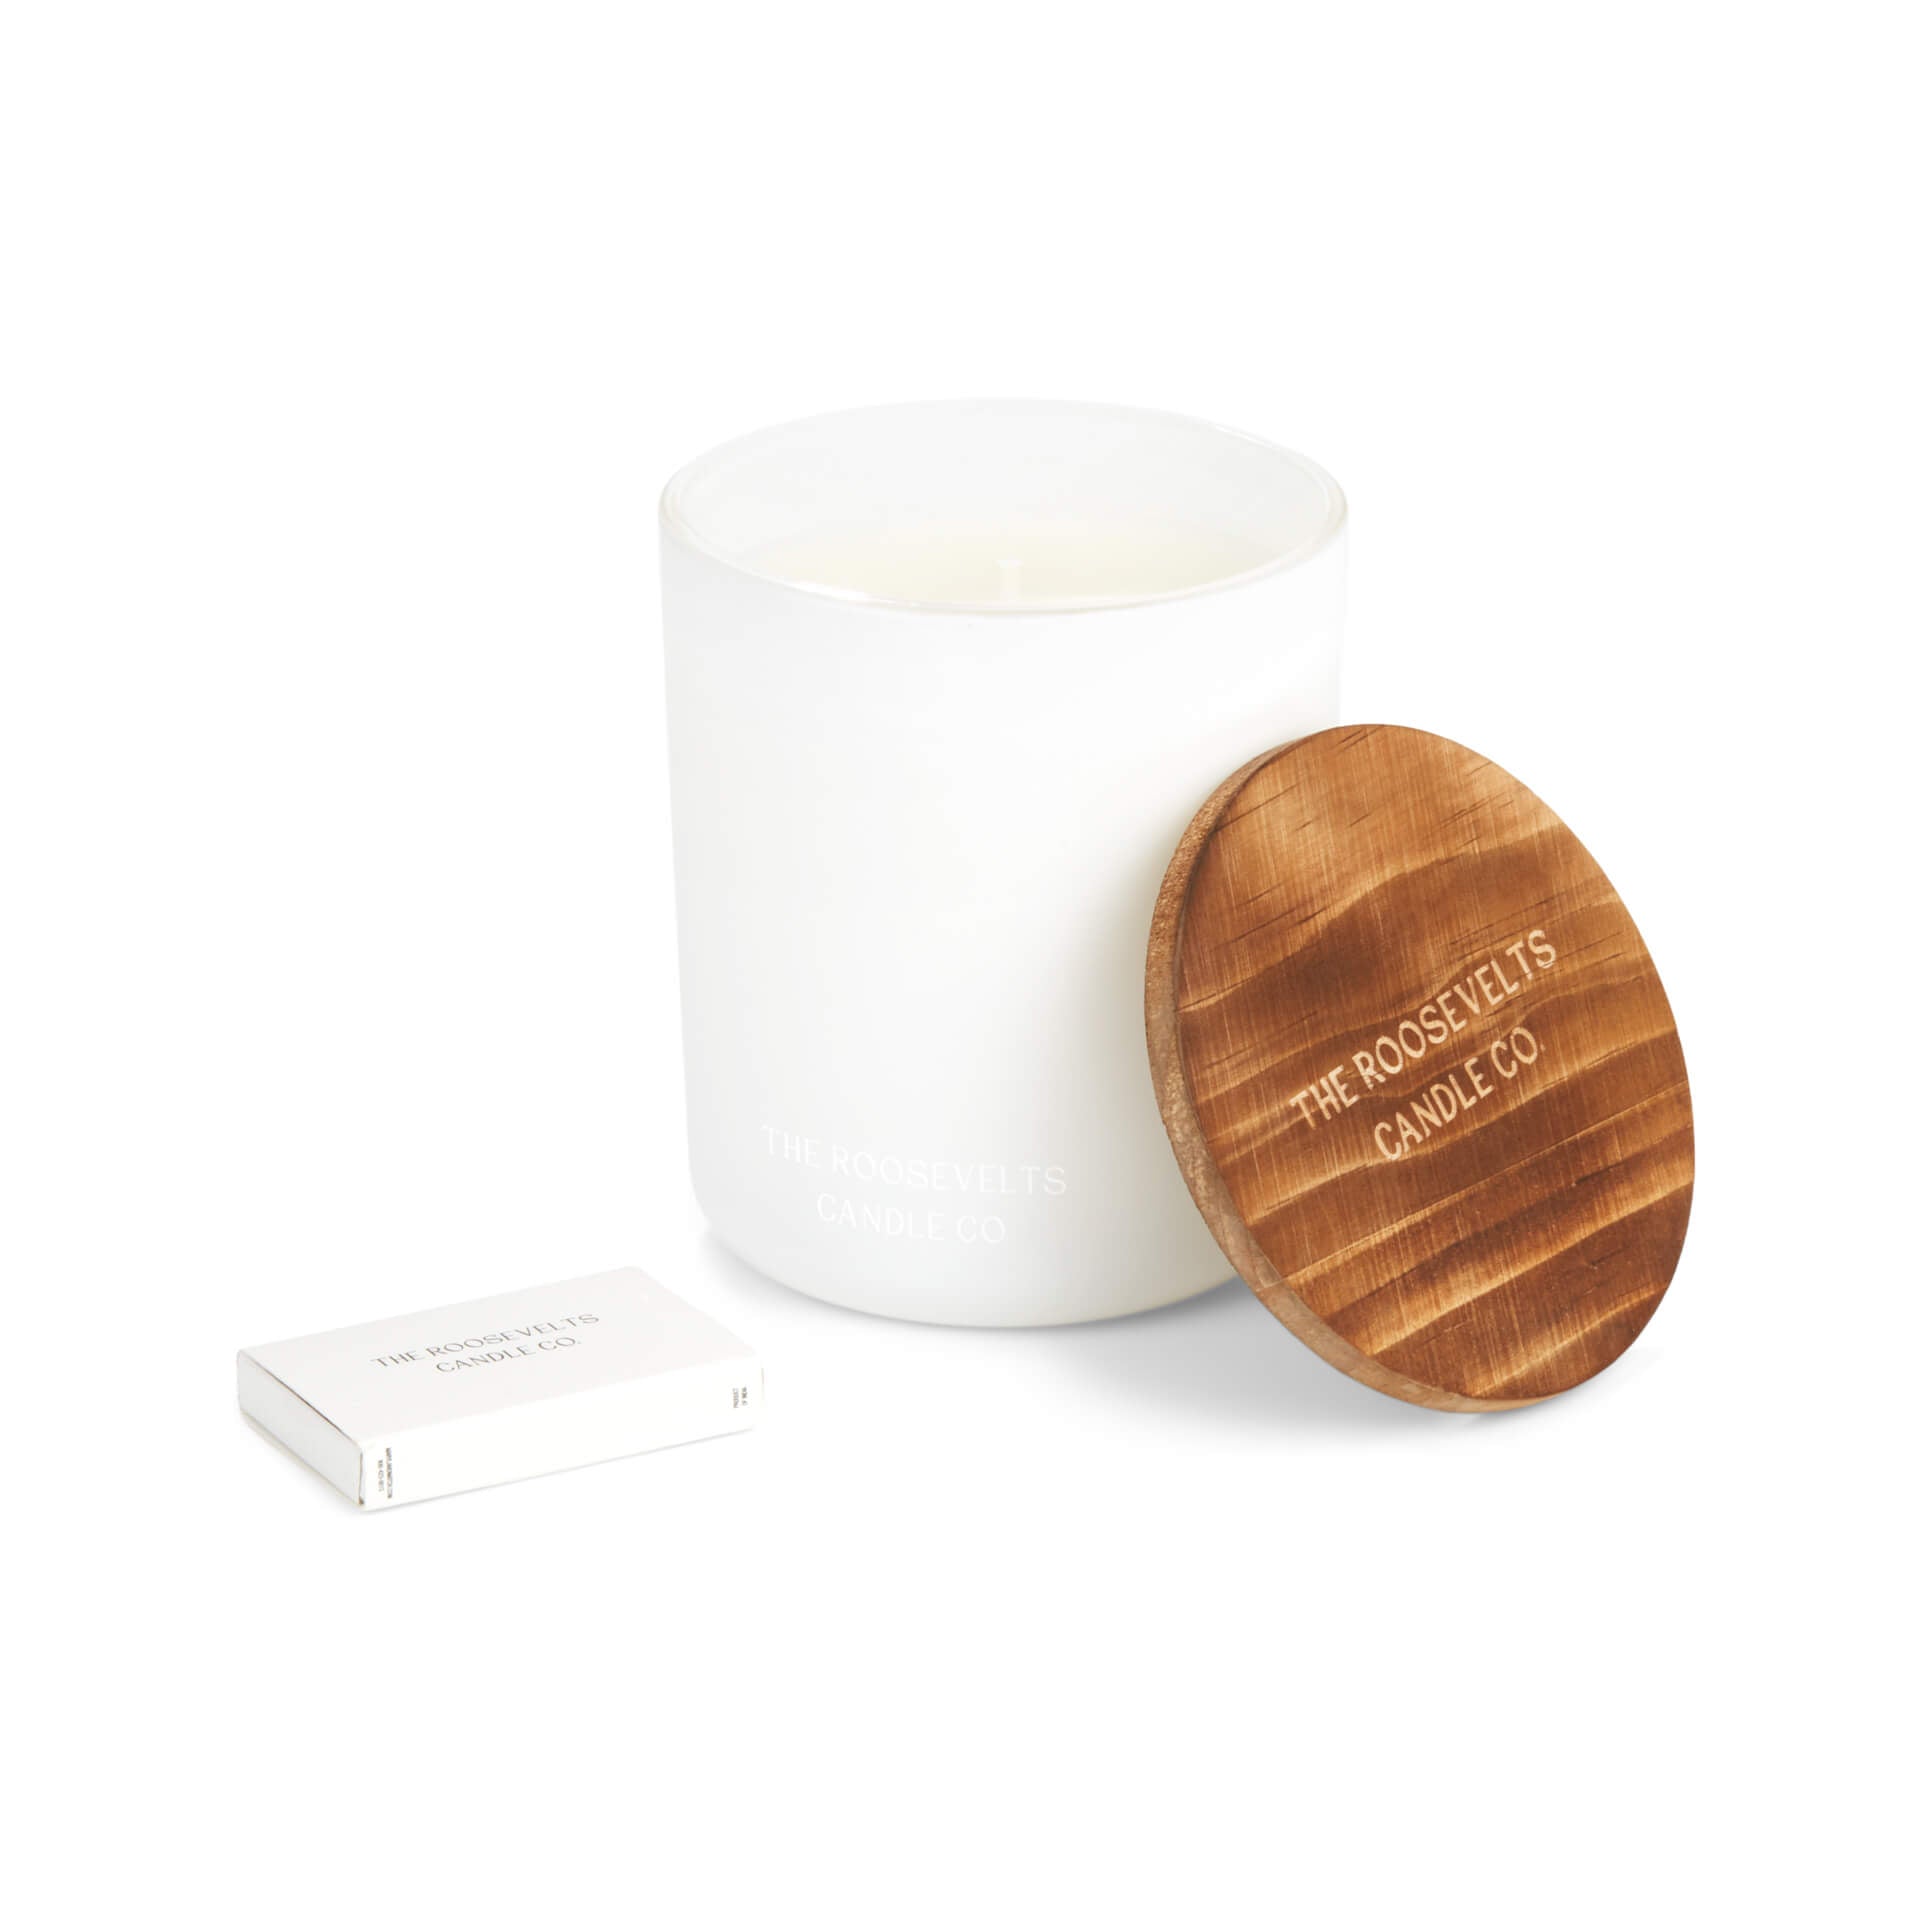 Yellowstone Candle - The Roosevelts Candle Co.